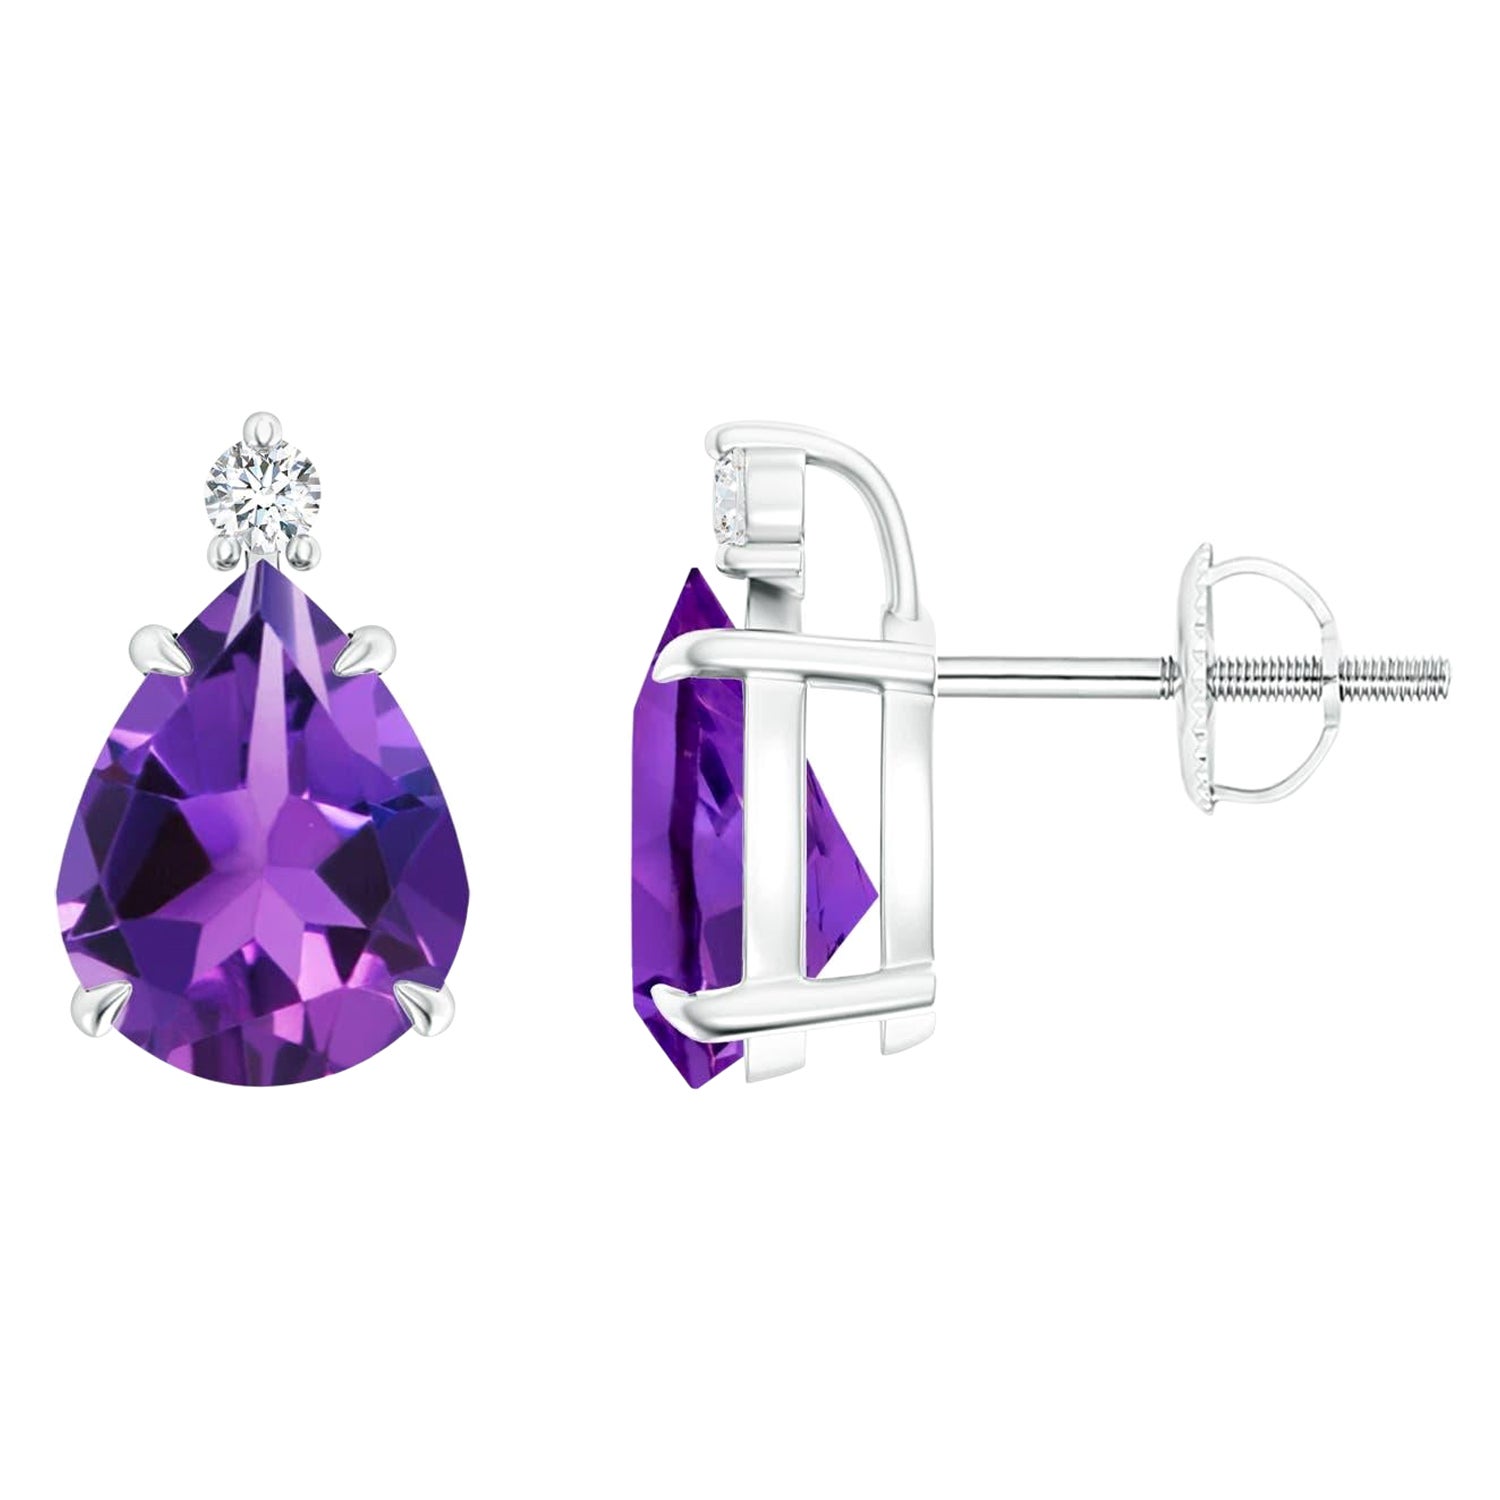 Natural Claw-Set Pear 3ct Amethyst Solitaire Earrings in 14K White Gold For Sale